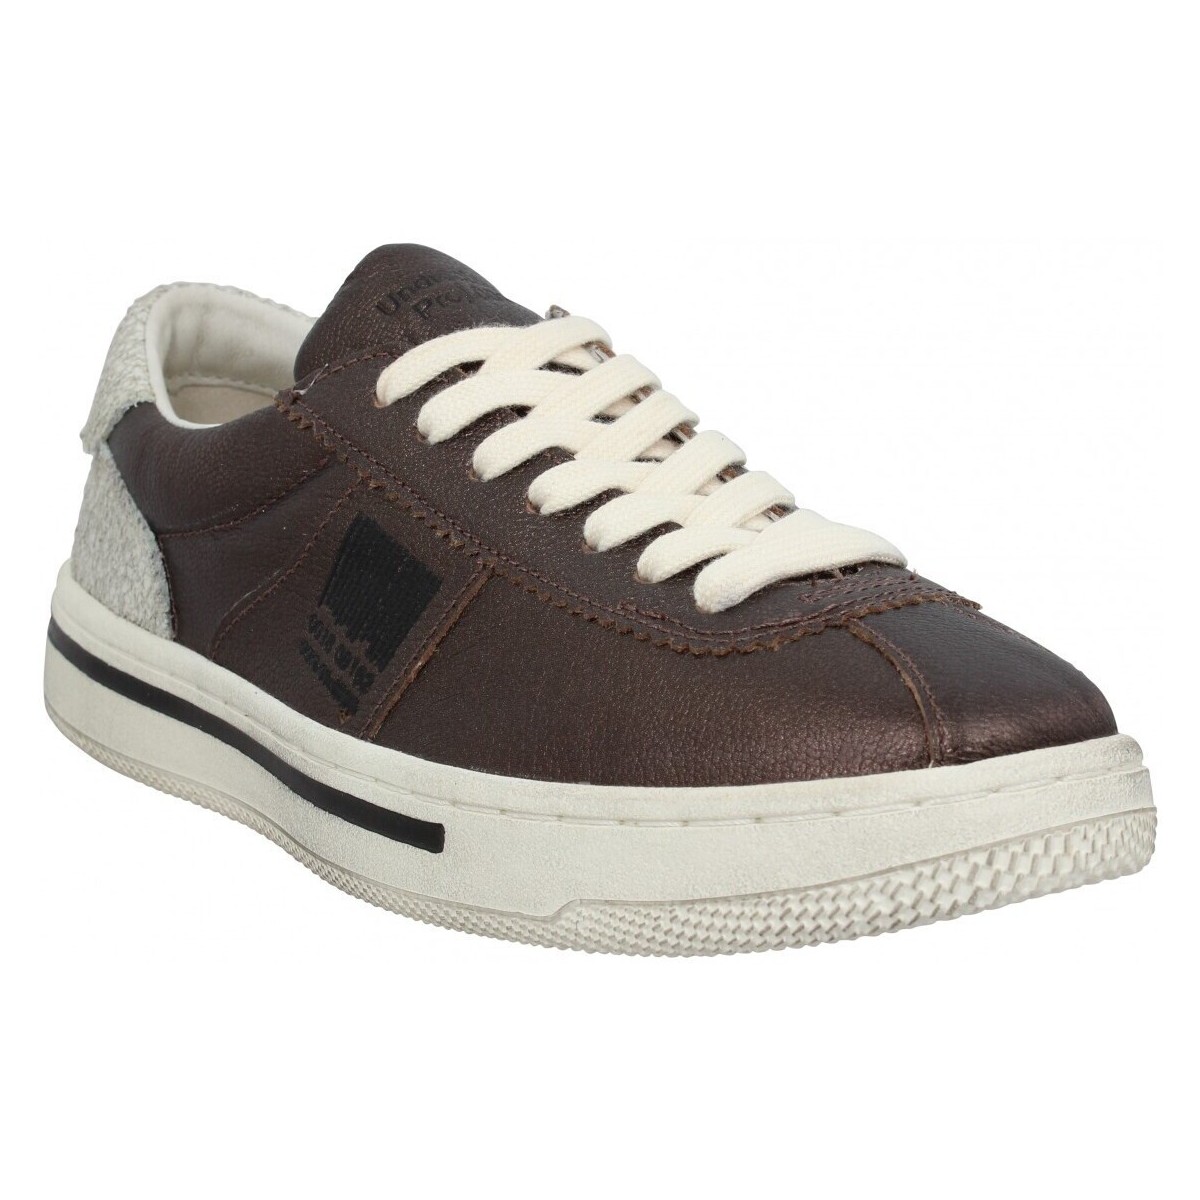 Sneakers Pro 01 Ject P5lw Cuir Laminated Femme Ebano